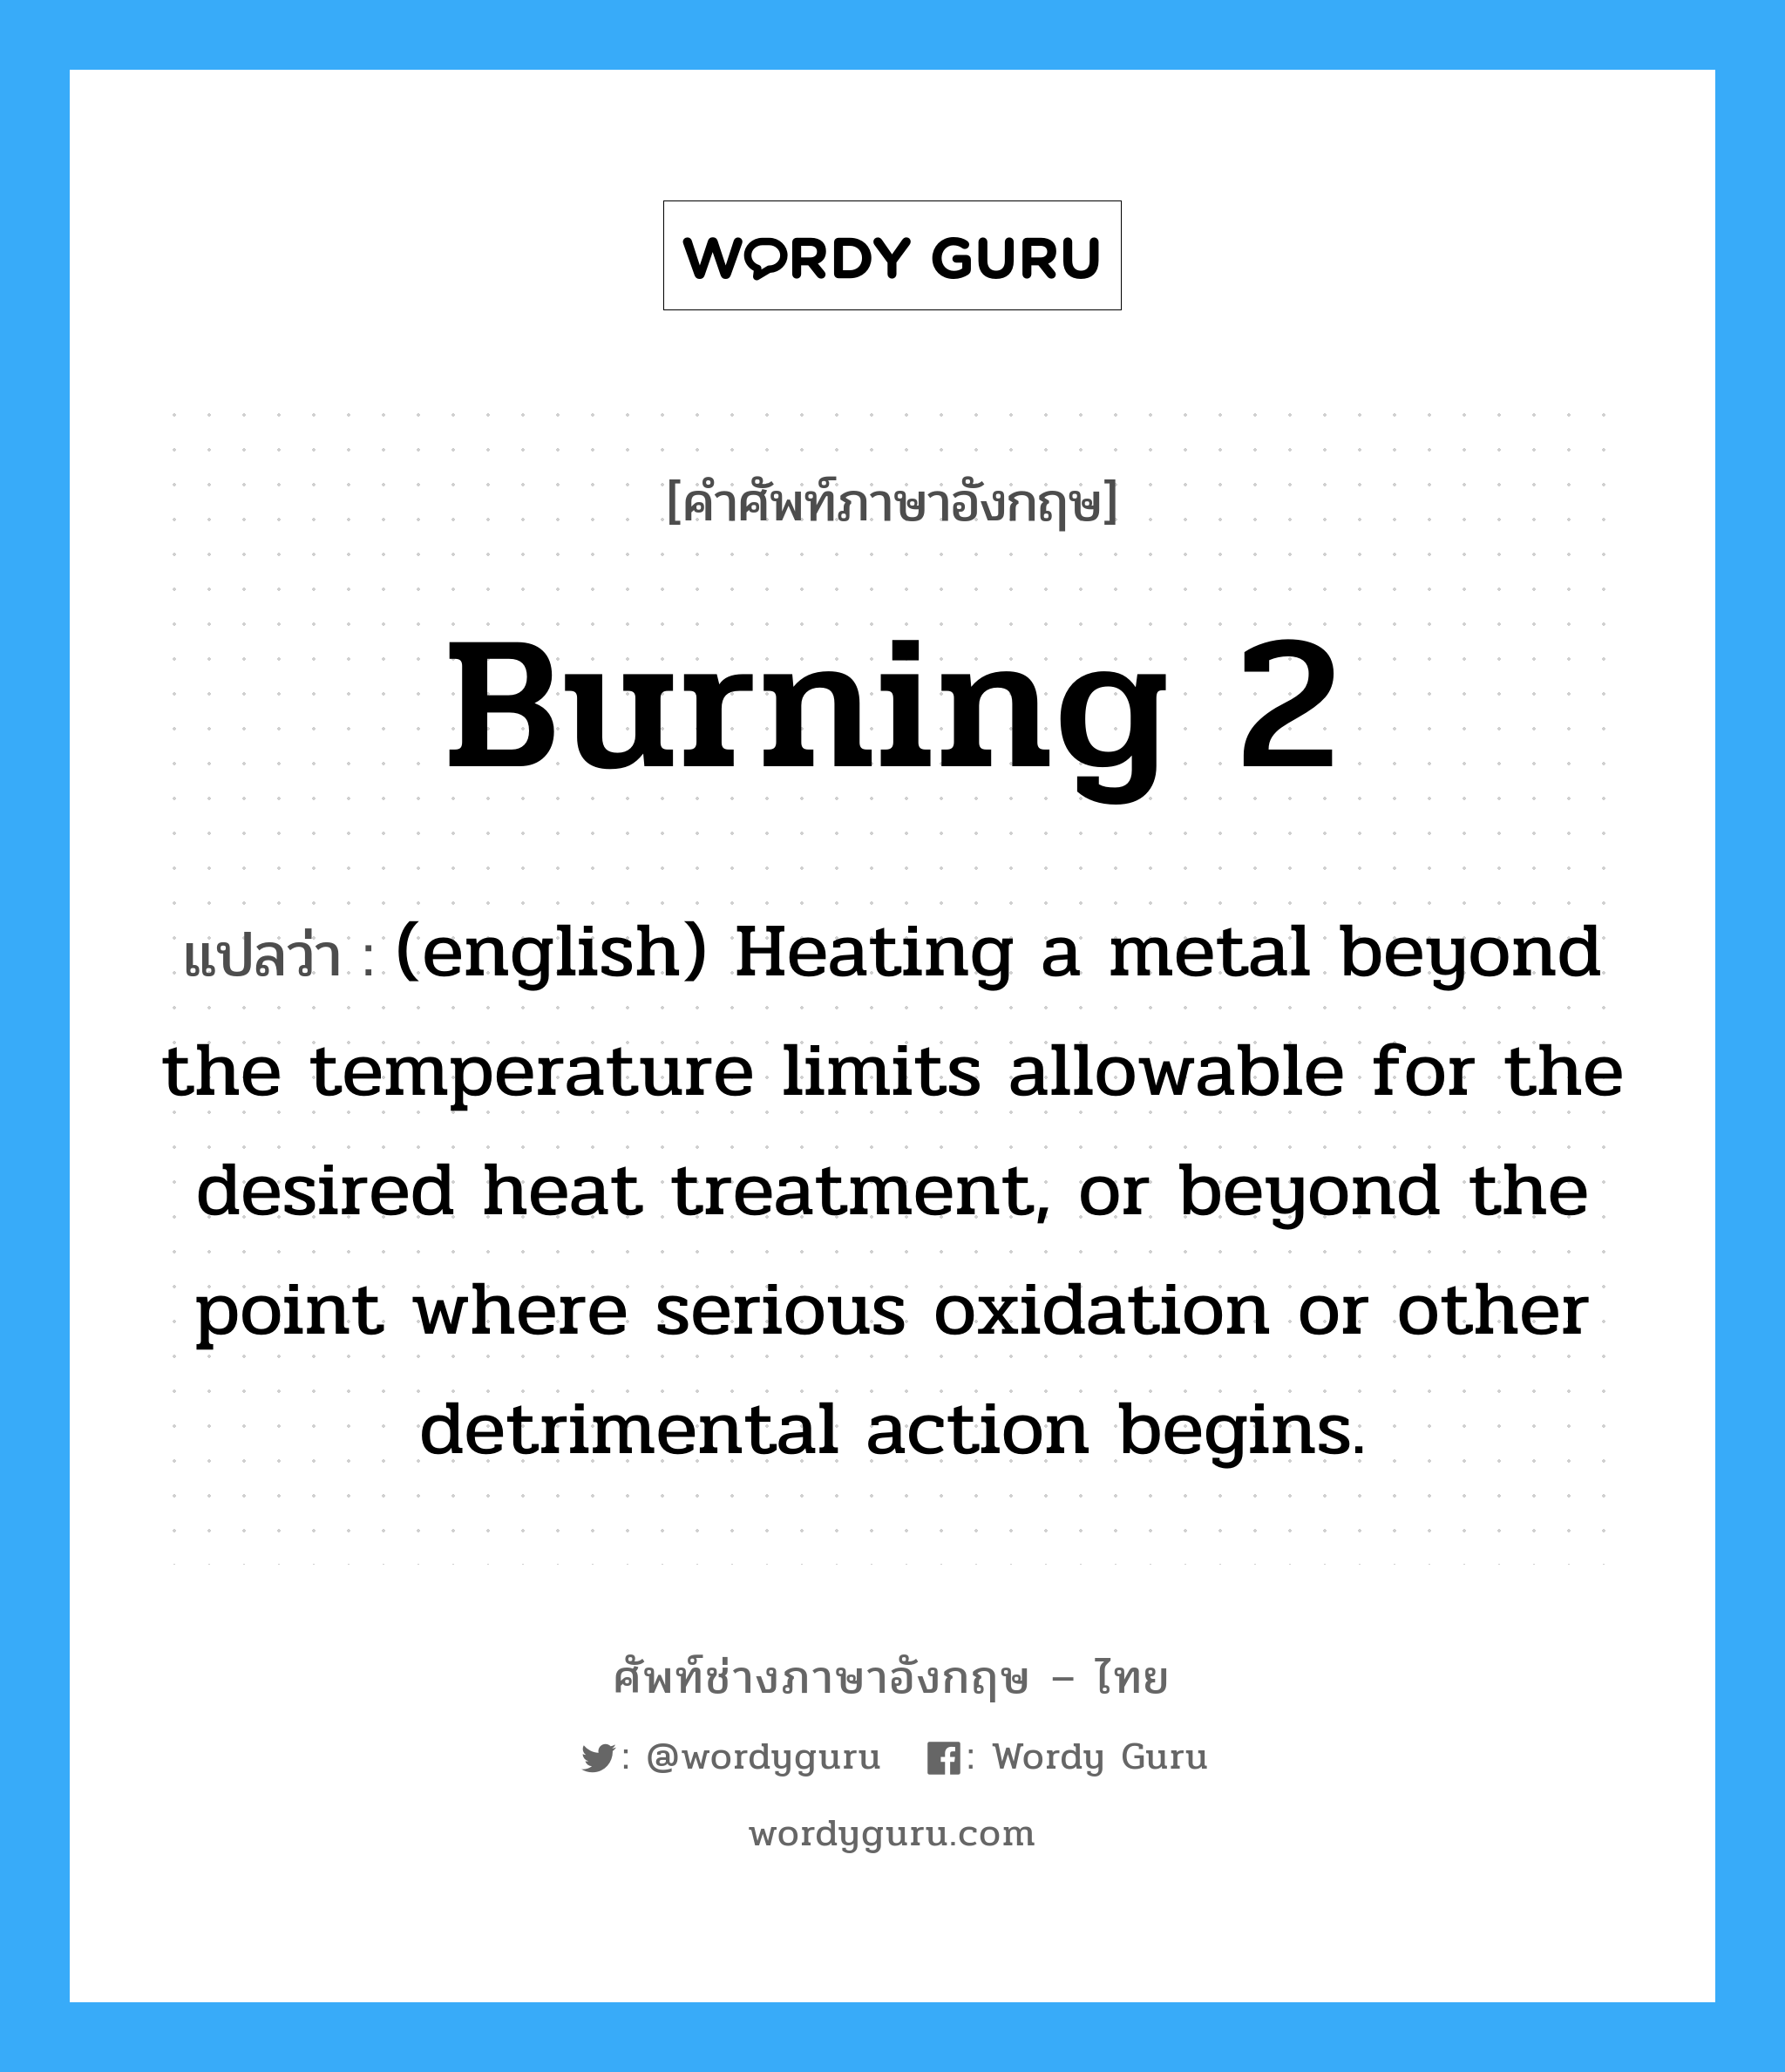 Burning 2 แปลว่า?, คำศัพท์ช่างภาษาอังกฤษ - ไทย Burning 2 คำศัพท์ภาษาอังกฤษ Burning 2 แปลว่า (english) Heating a metal beyond the temperature limits allowable for the desired heat treatment, or beyond the point where serious oxidation or other detrimental action begins.